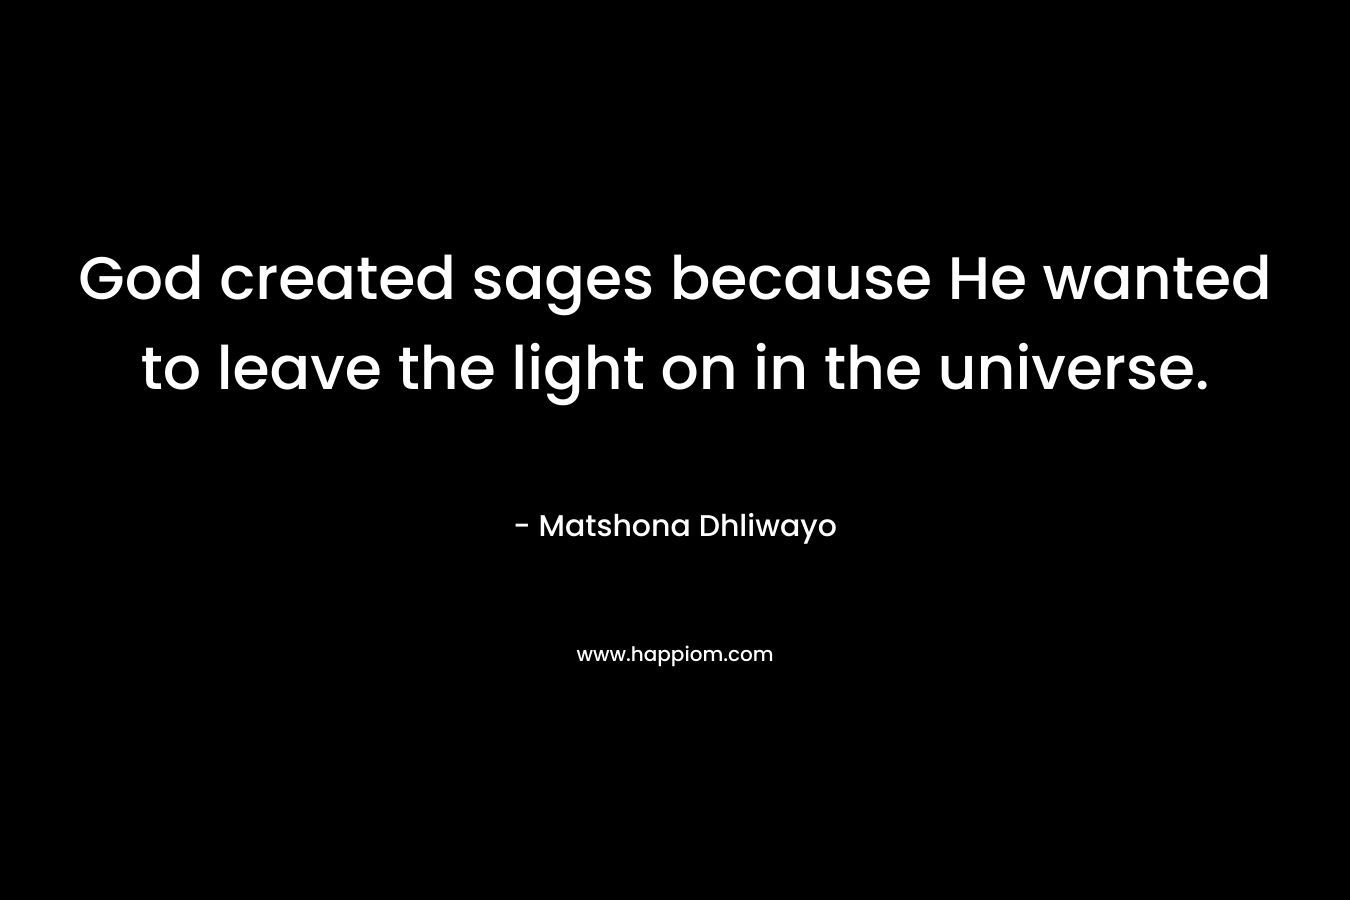 God created sages because He wanted to leave the light on in the universe. – Matshona Dhliwayo